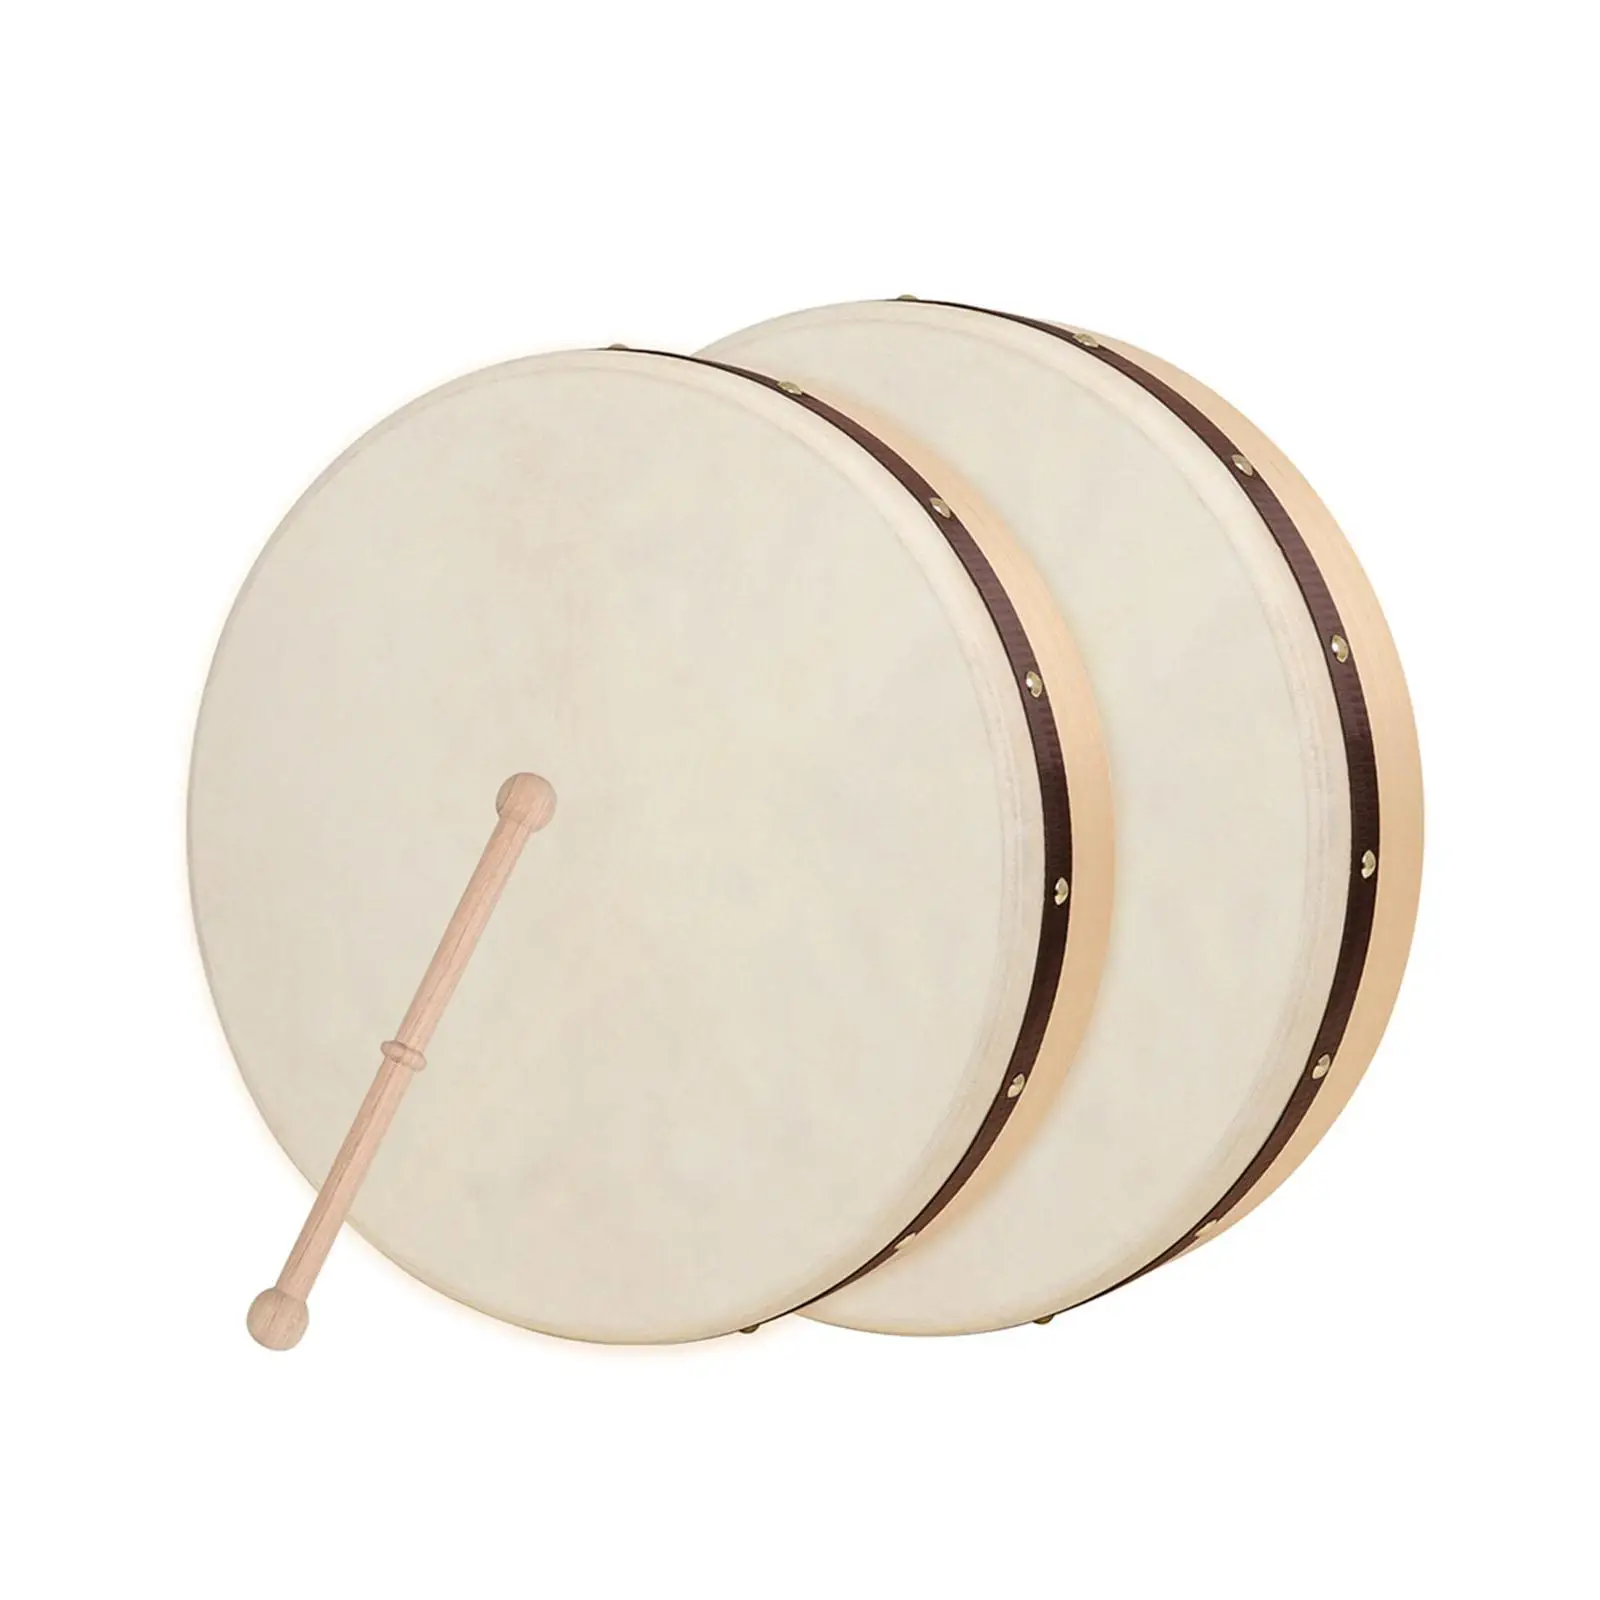 Wooden Hand Drum Tambourine Kids Percussion Toy Wood Frame Drum for Children Music Game Convenient to Carry Around